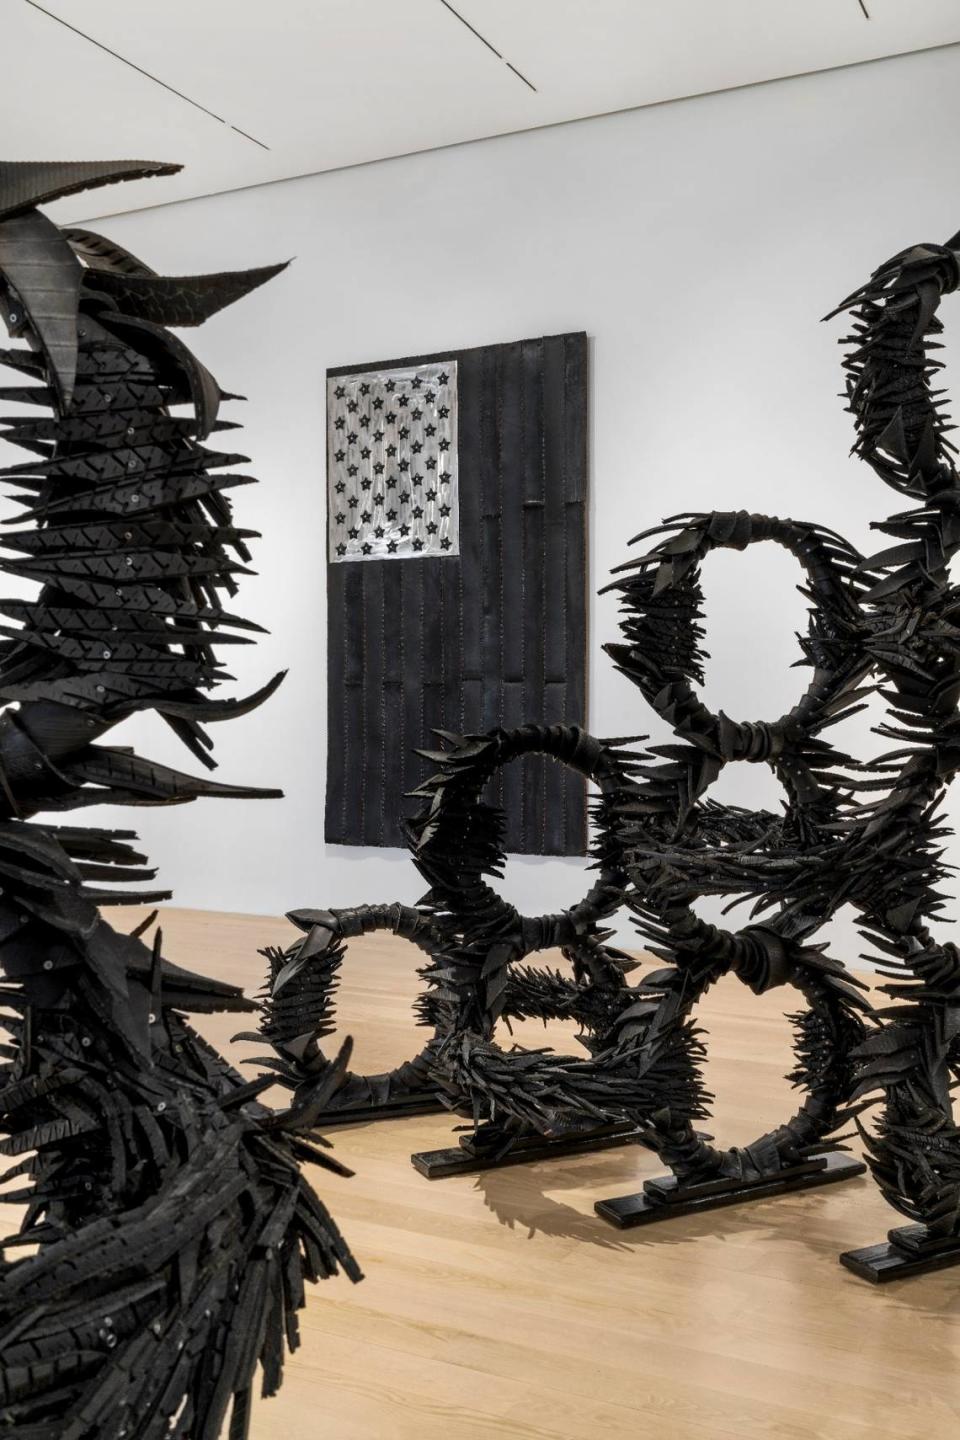 Institute for Contemporary Art - Miami is featuring sculptures made from cast-off tires by New York-based artist Chakaia Booker.